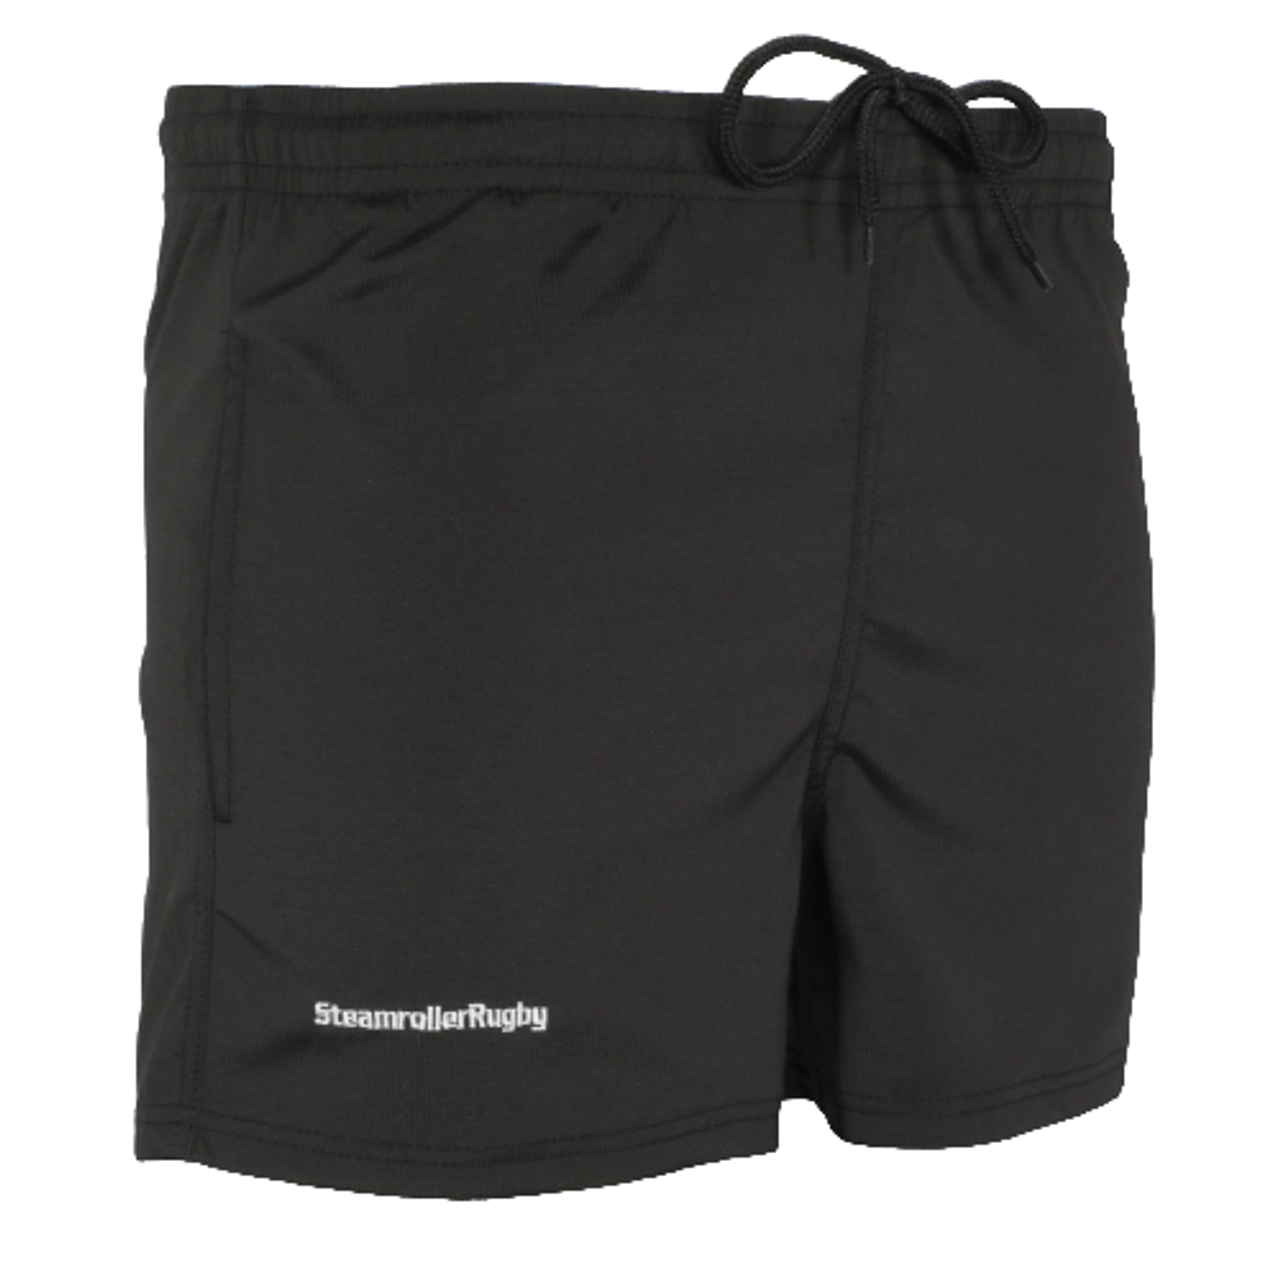 Frostburg 50th Anniversary SRS Pocketed Performance Shorts